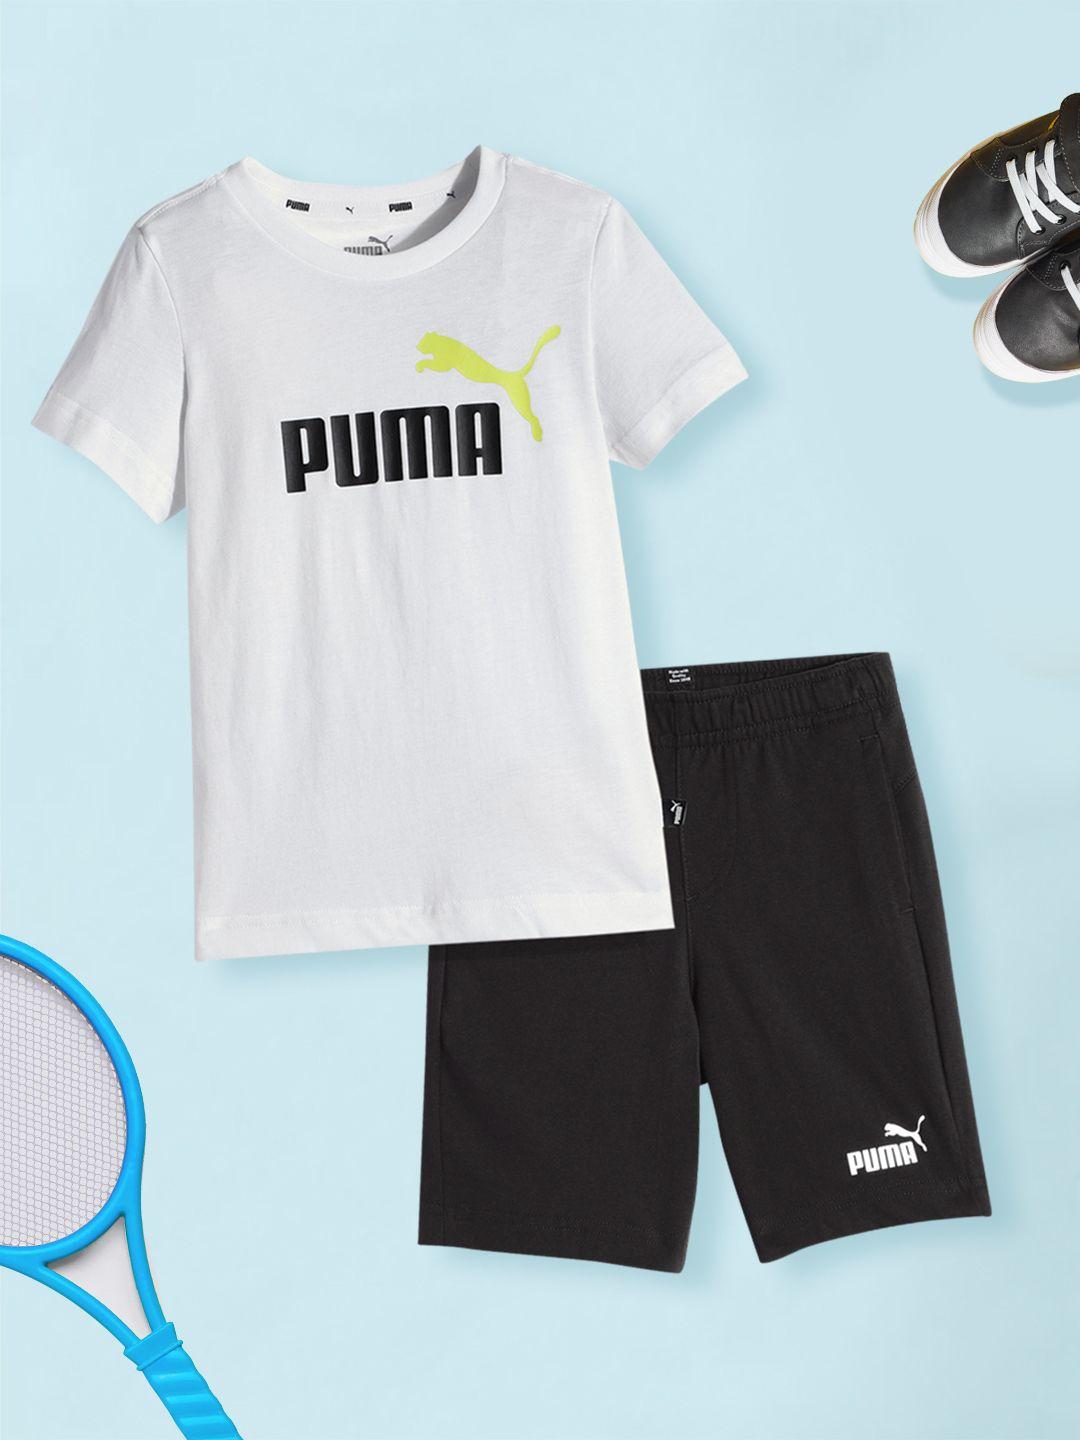 puma-boys-white-&-black-brand-logo-print-knitted-jersey-youth-t-shirt-with-shorts